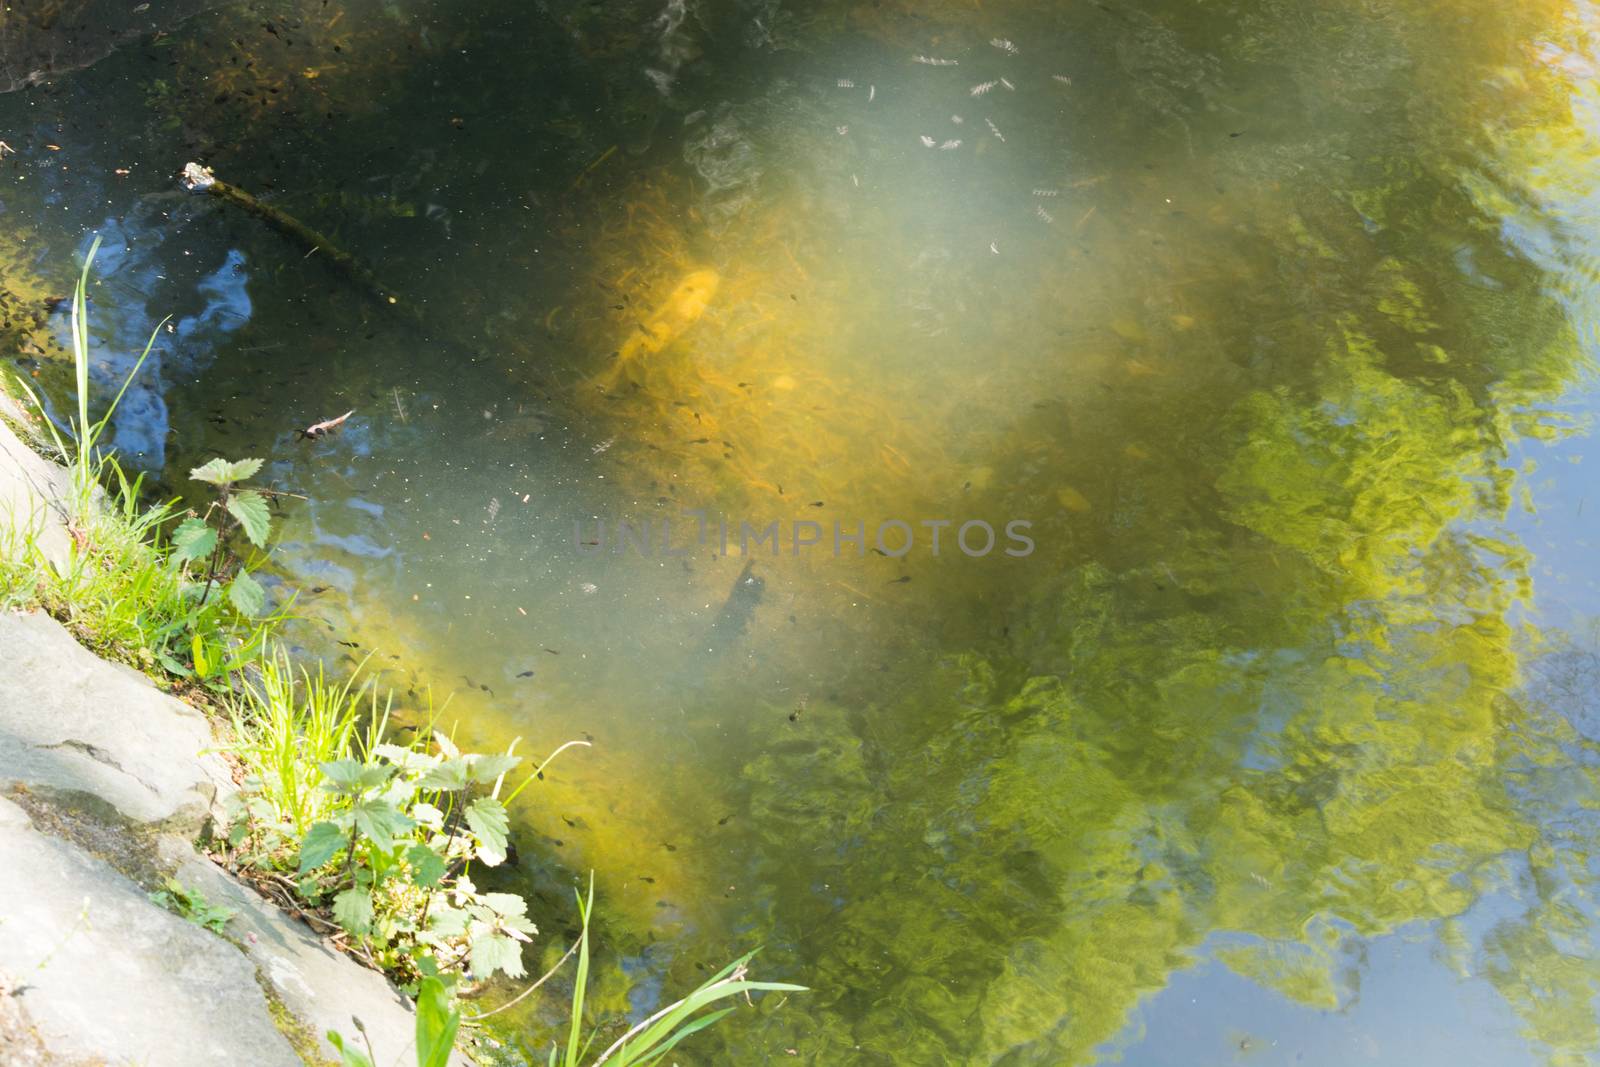 Tadpoles family and green nature background in the water